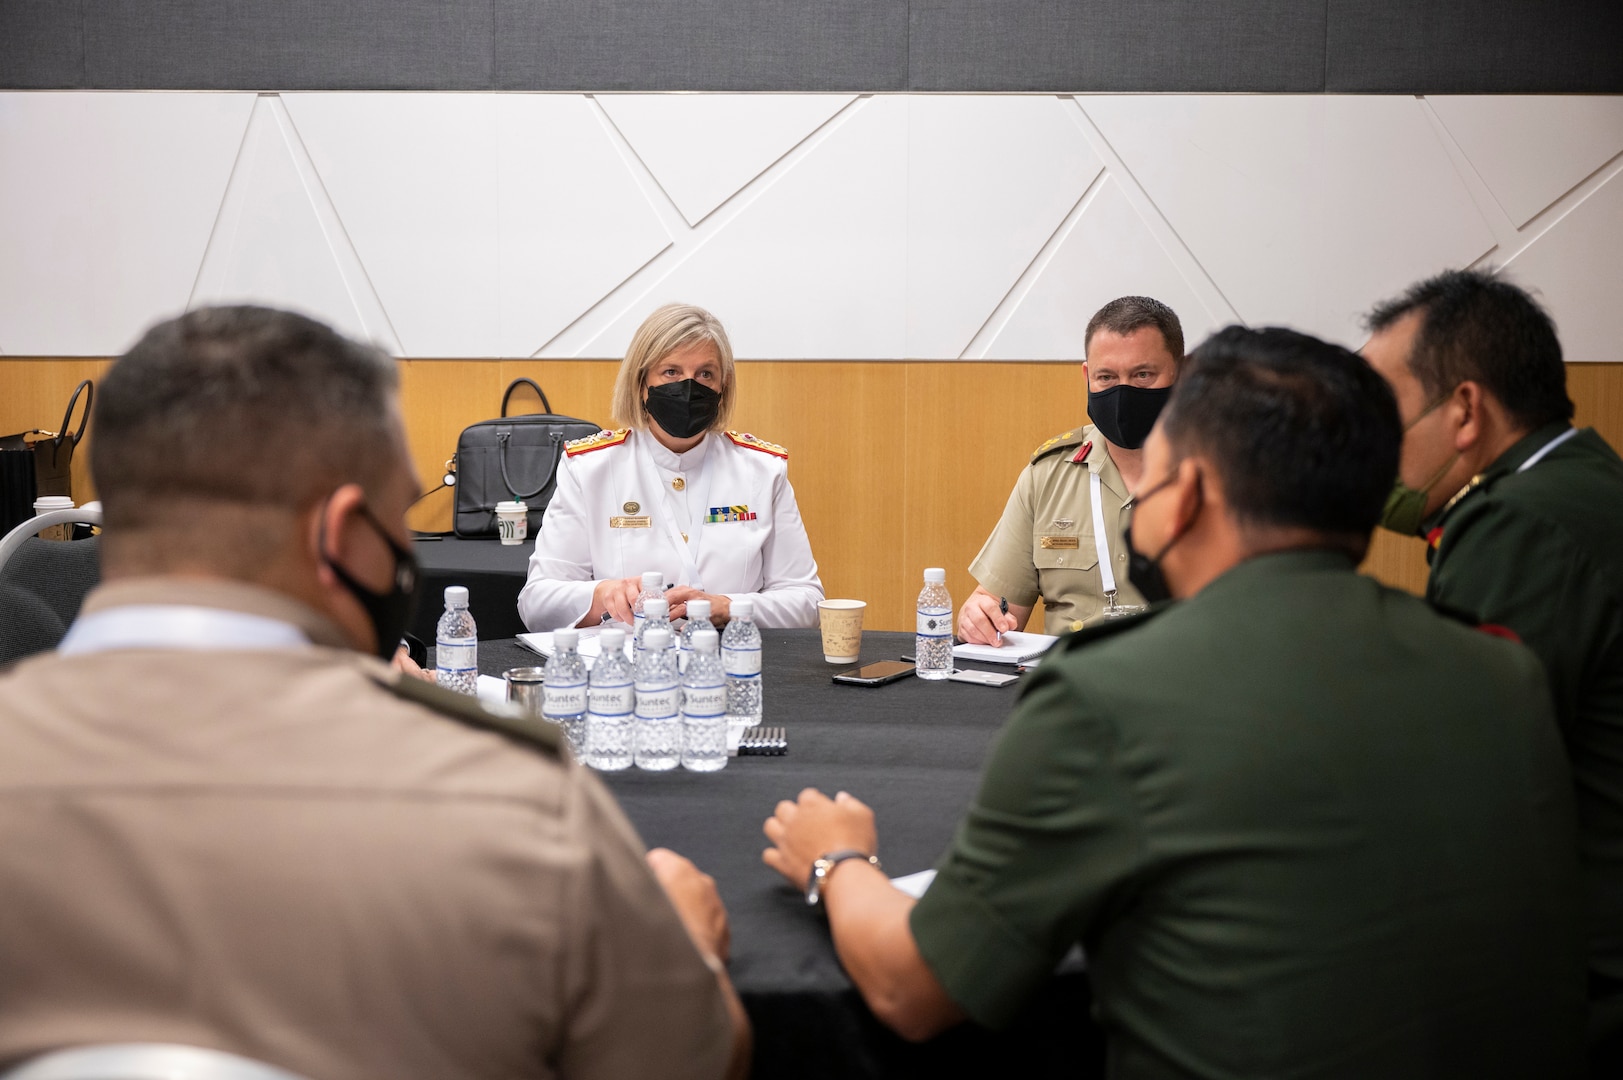 Rear Adm. Sarah Sharkey (left), the Australian Defense Force (ADF) Joint Health Surgeon, speaks with delegates from Malaysia on the treatment of infectious diseases during the second Military-Civilian Health Security Summit June 28, 2022, in Singapore. The summit, held June 27-28, focused on regional approaches to global health security through interagency cooperation with allies and partners.